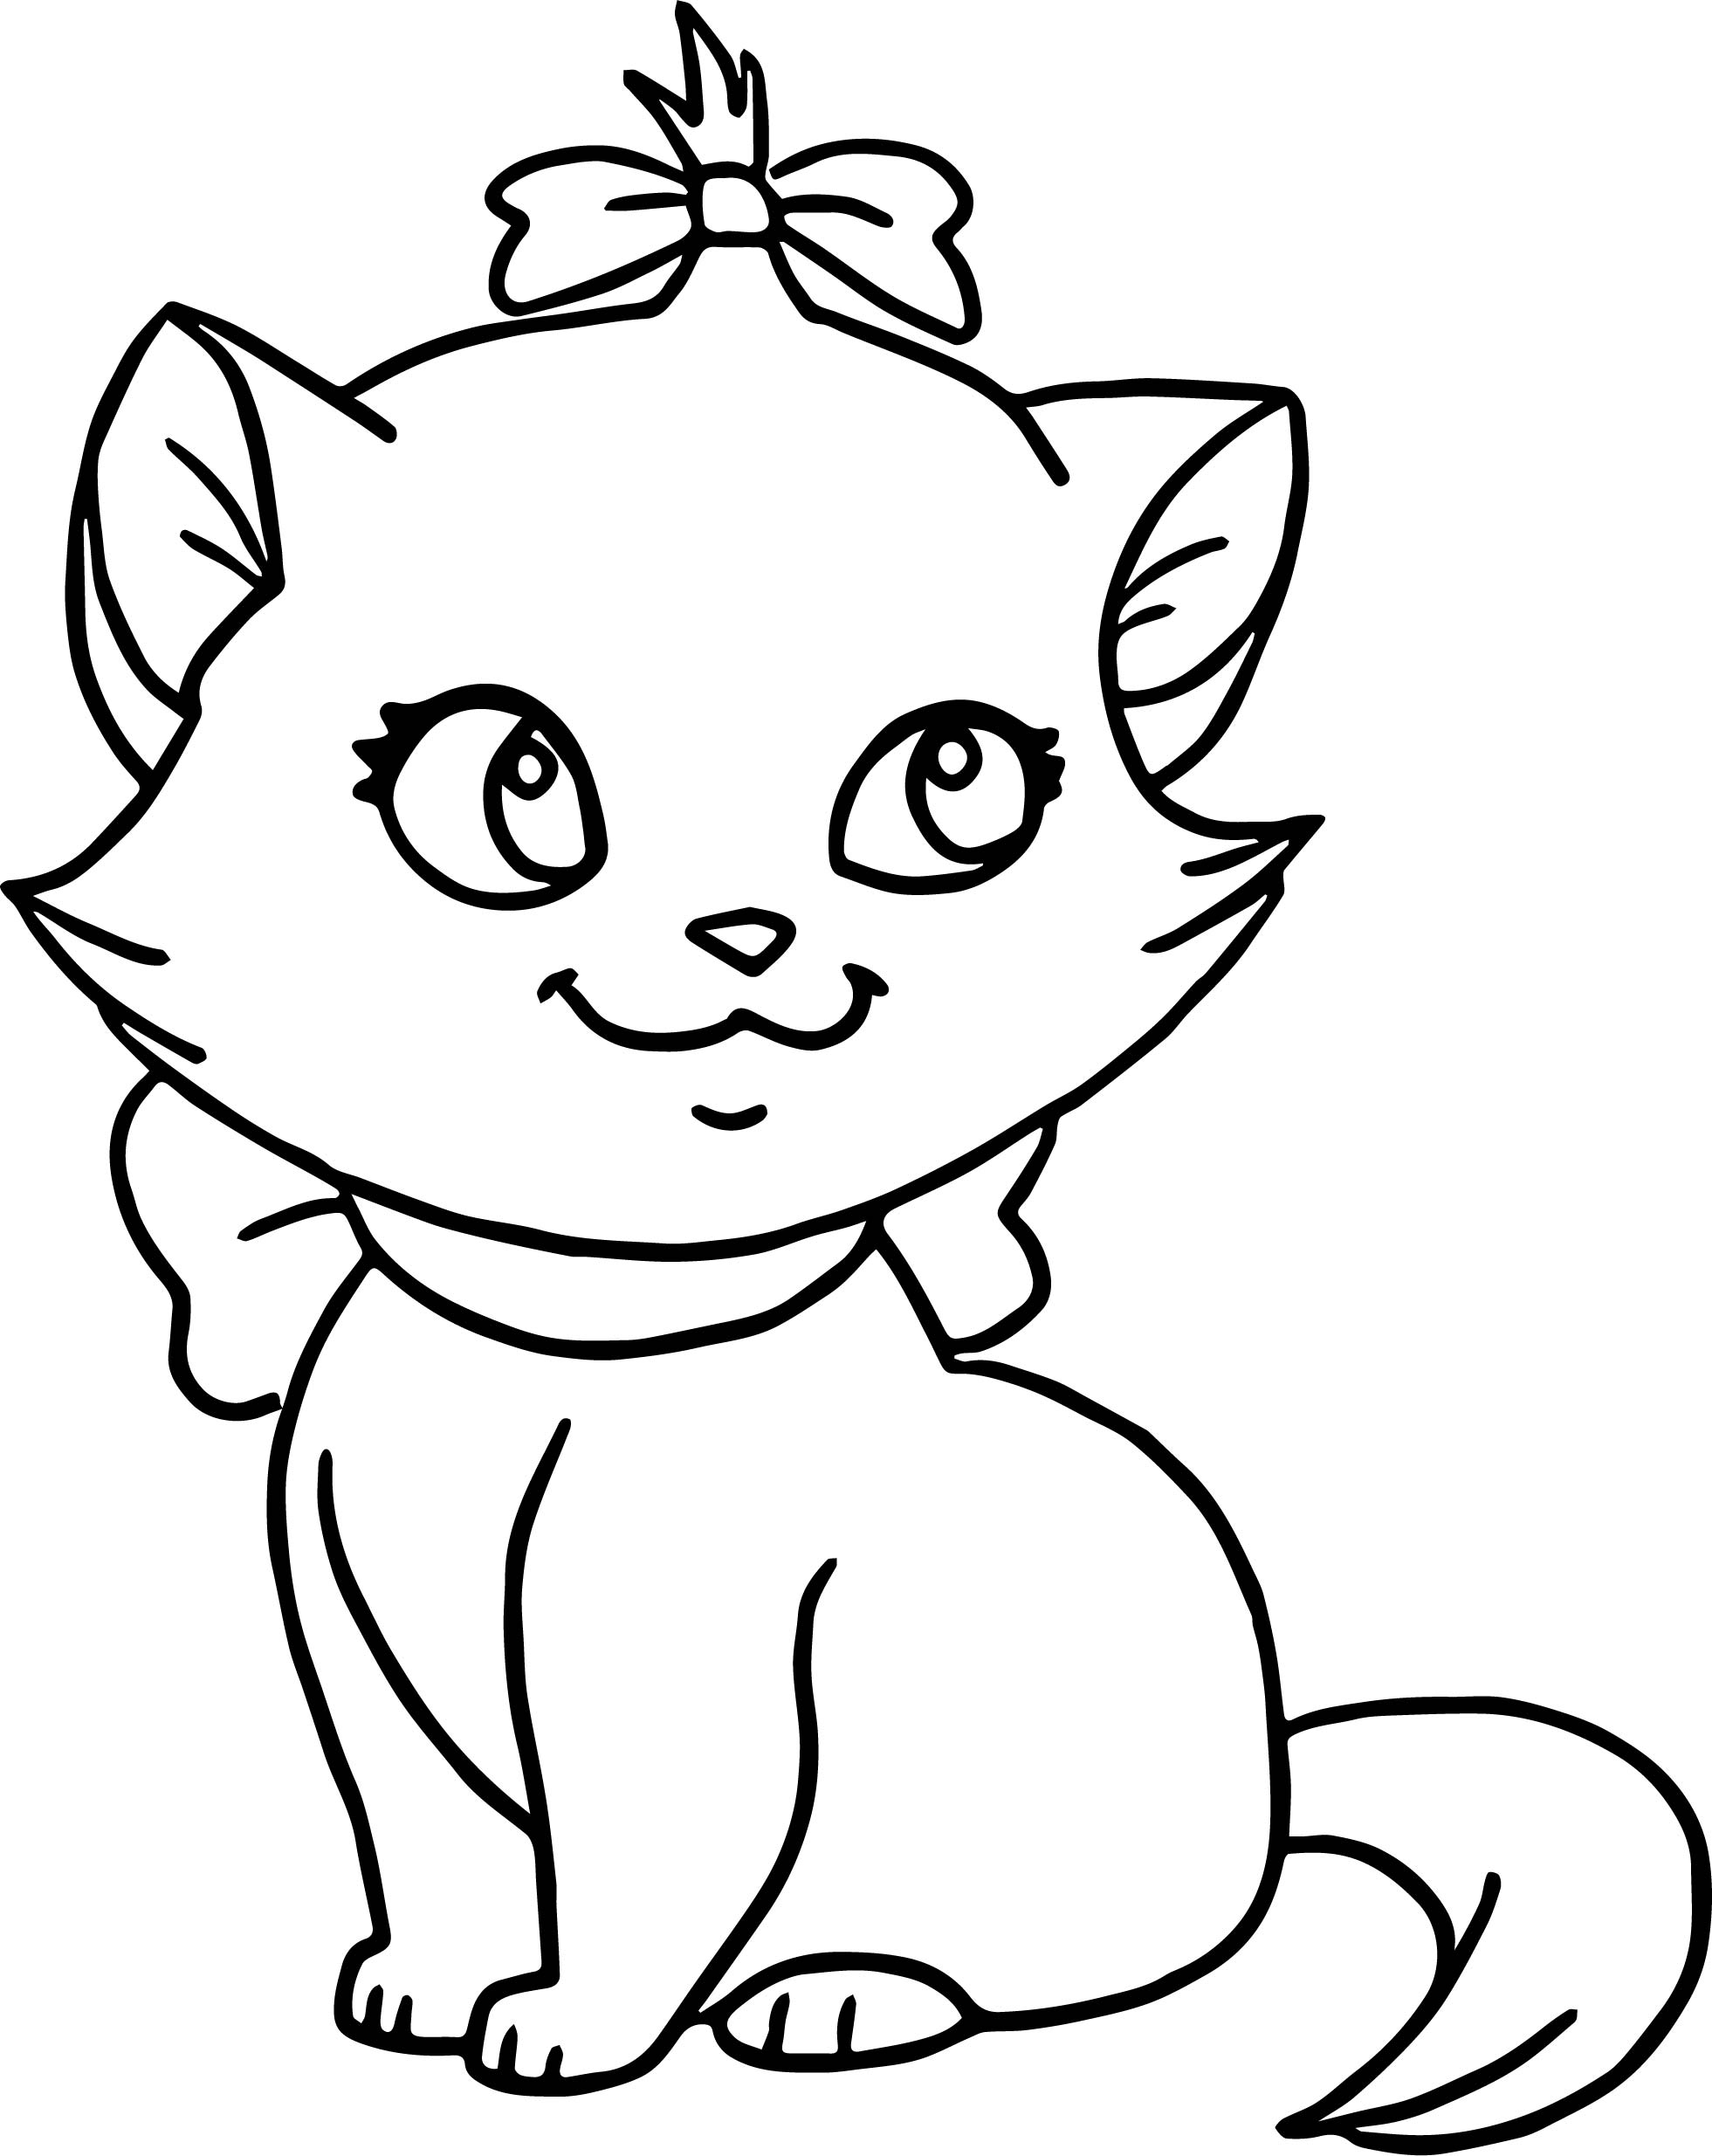 Aristocats Marie Coloring Pages at GetColorings.com | Free printable ...